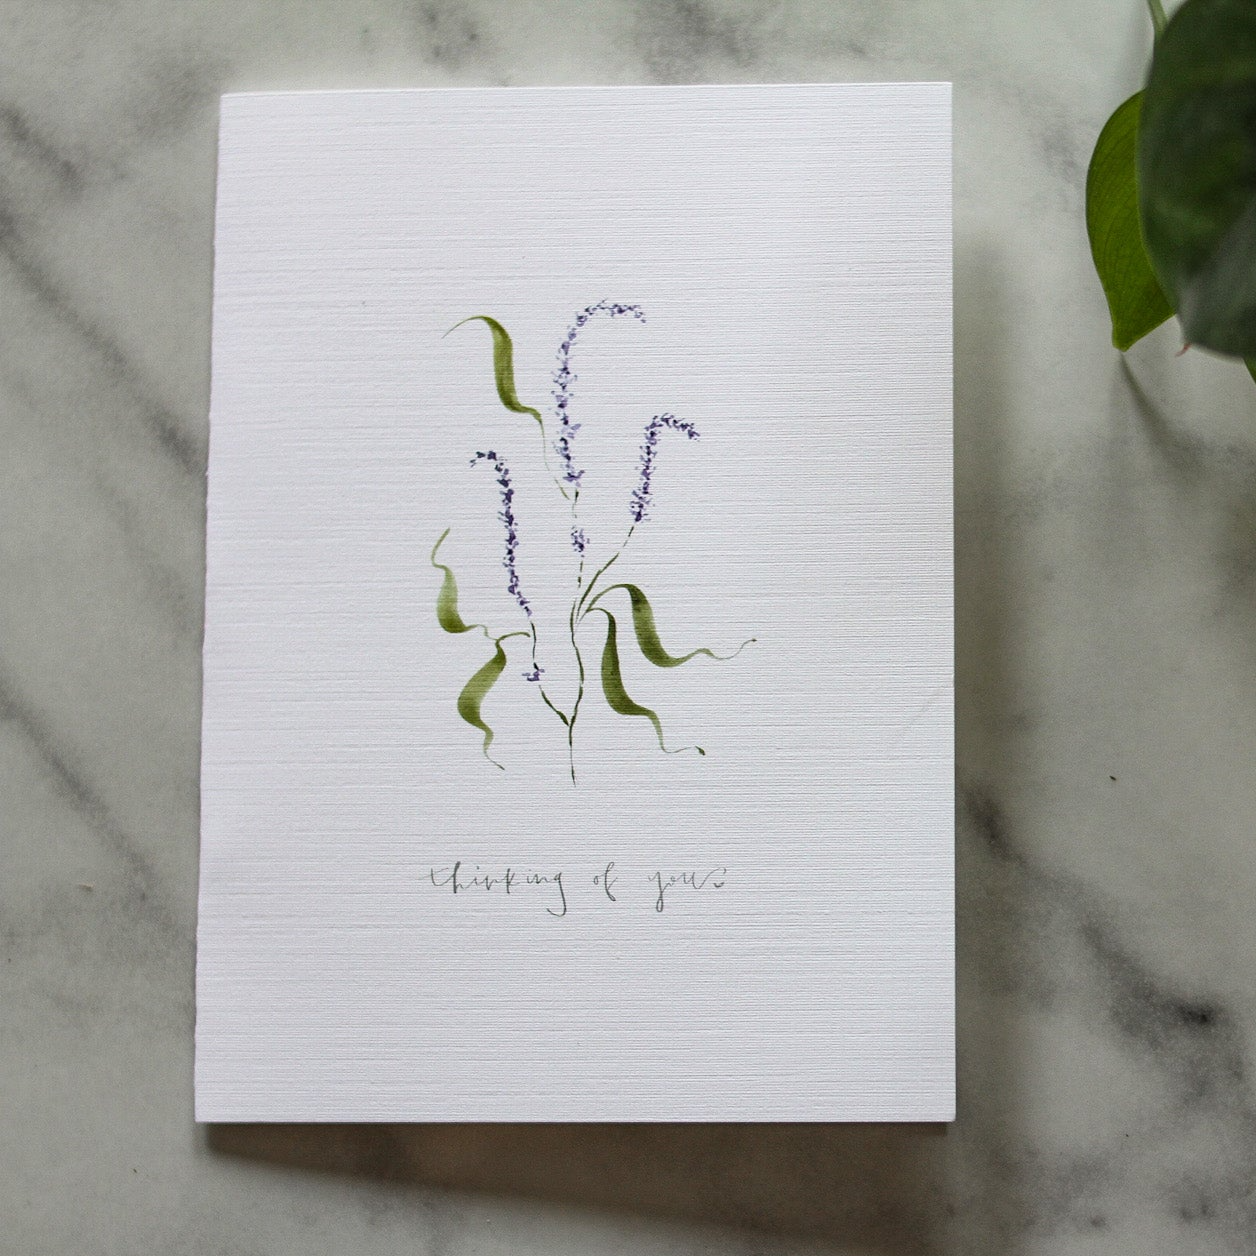 Lavender "thinking of you" card